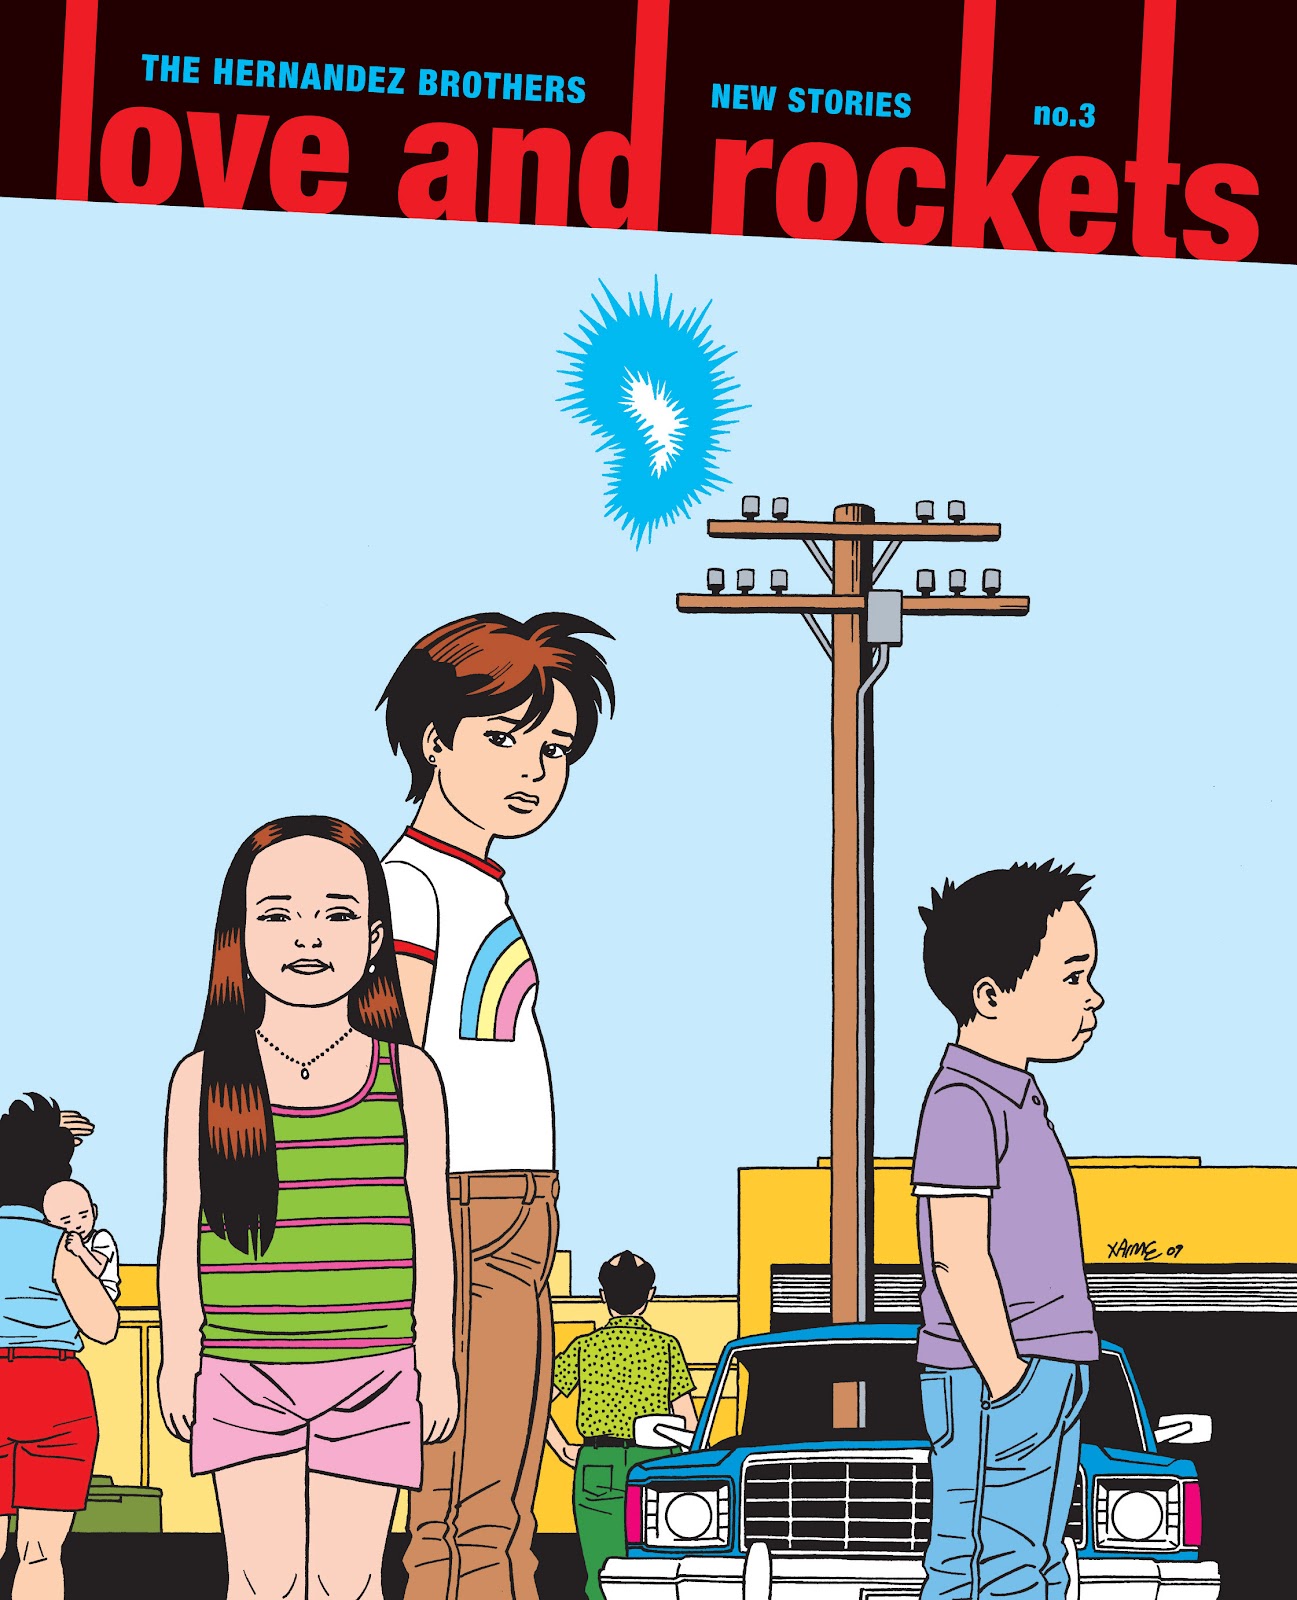 That new story. Любовь и ракеты комикс. Love and Rockets: New stories. New story. New storie картинка.